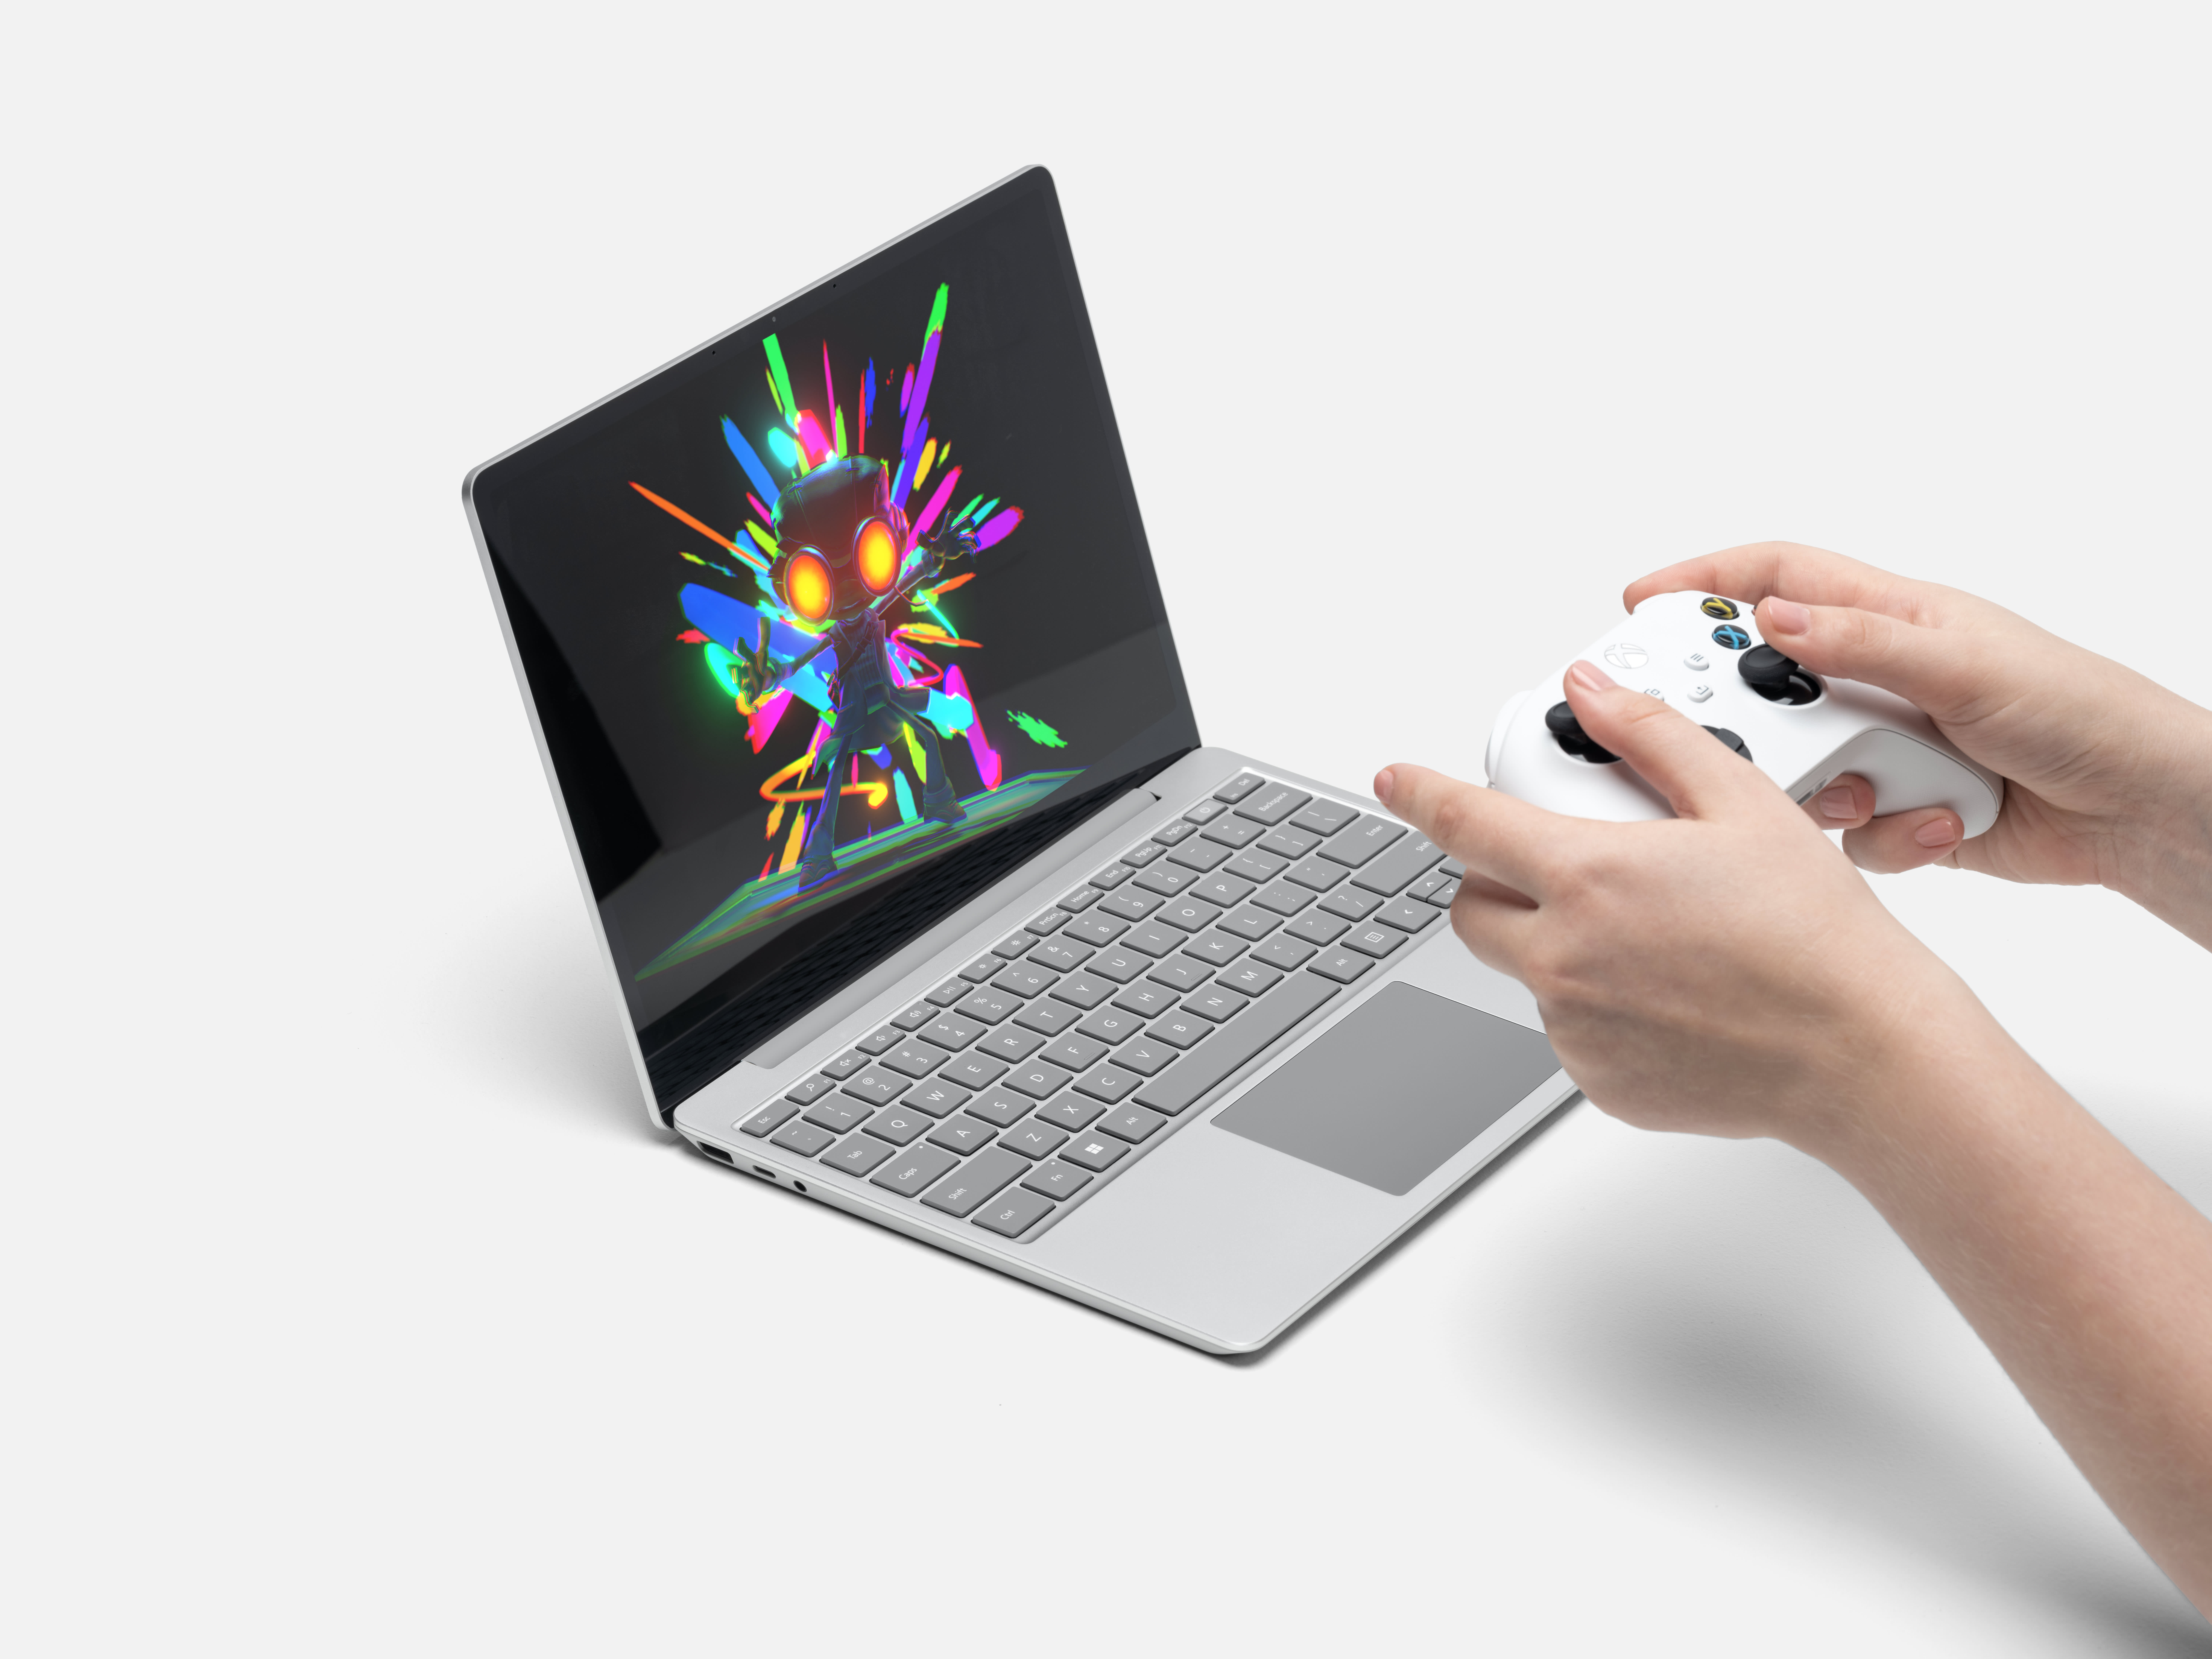 Microsoft launches Surface Laptop Go 2 at $599 with 128GB SSD